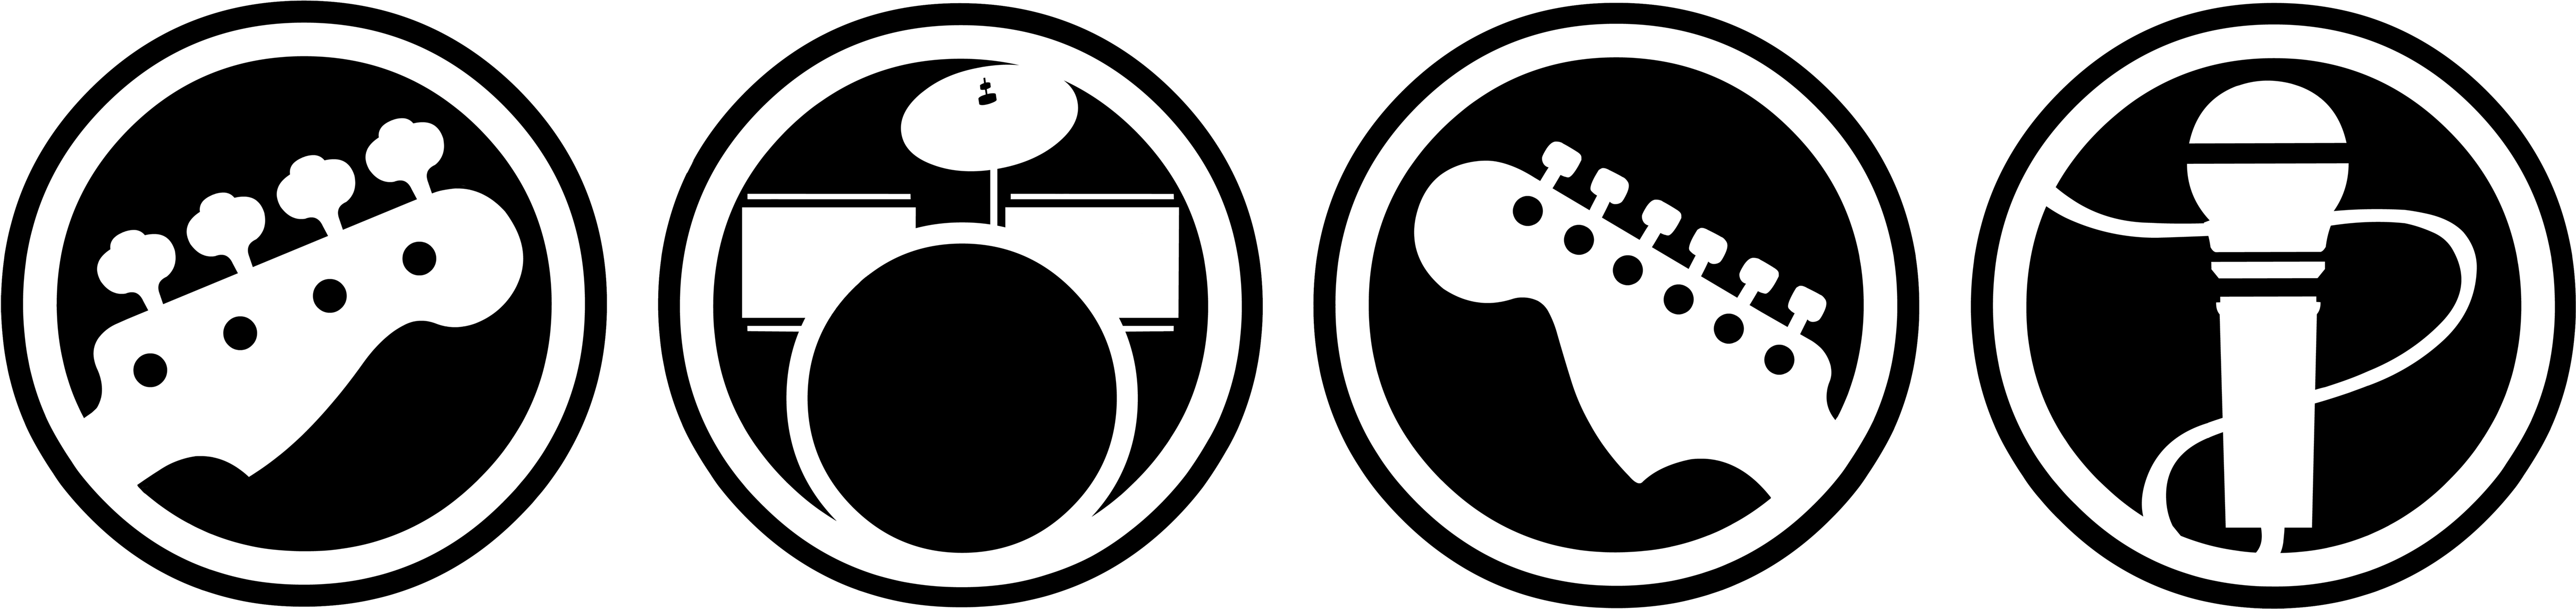 Rock Band Silhouette PNG Free Download